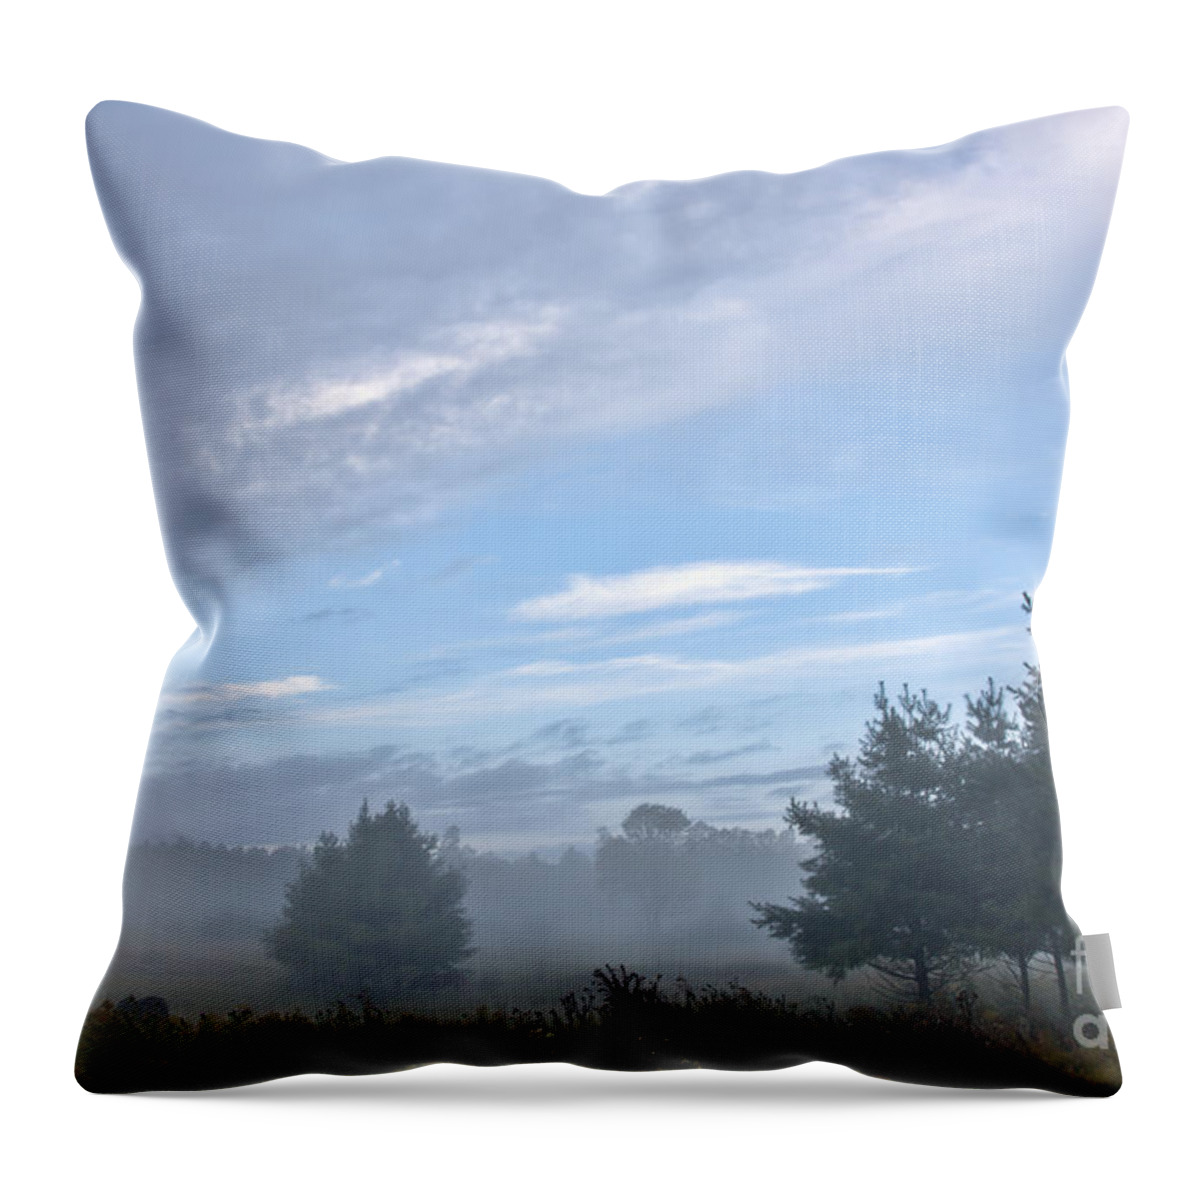  Throw Pillow featuring the photograph Misty Monday by Cheryl Baxter